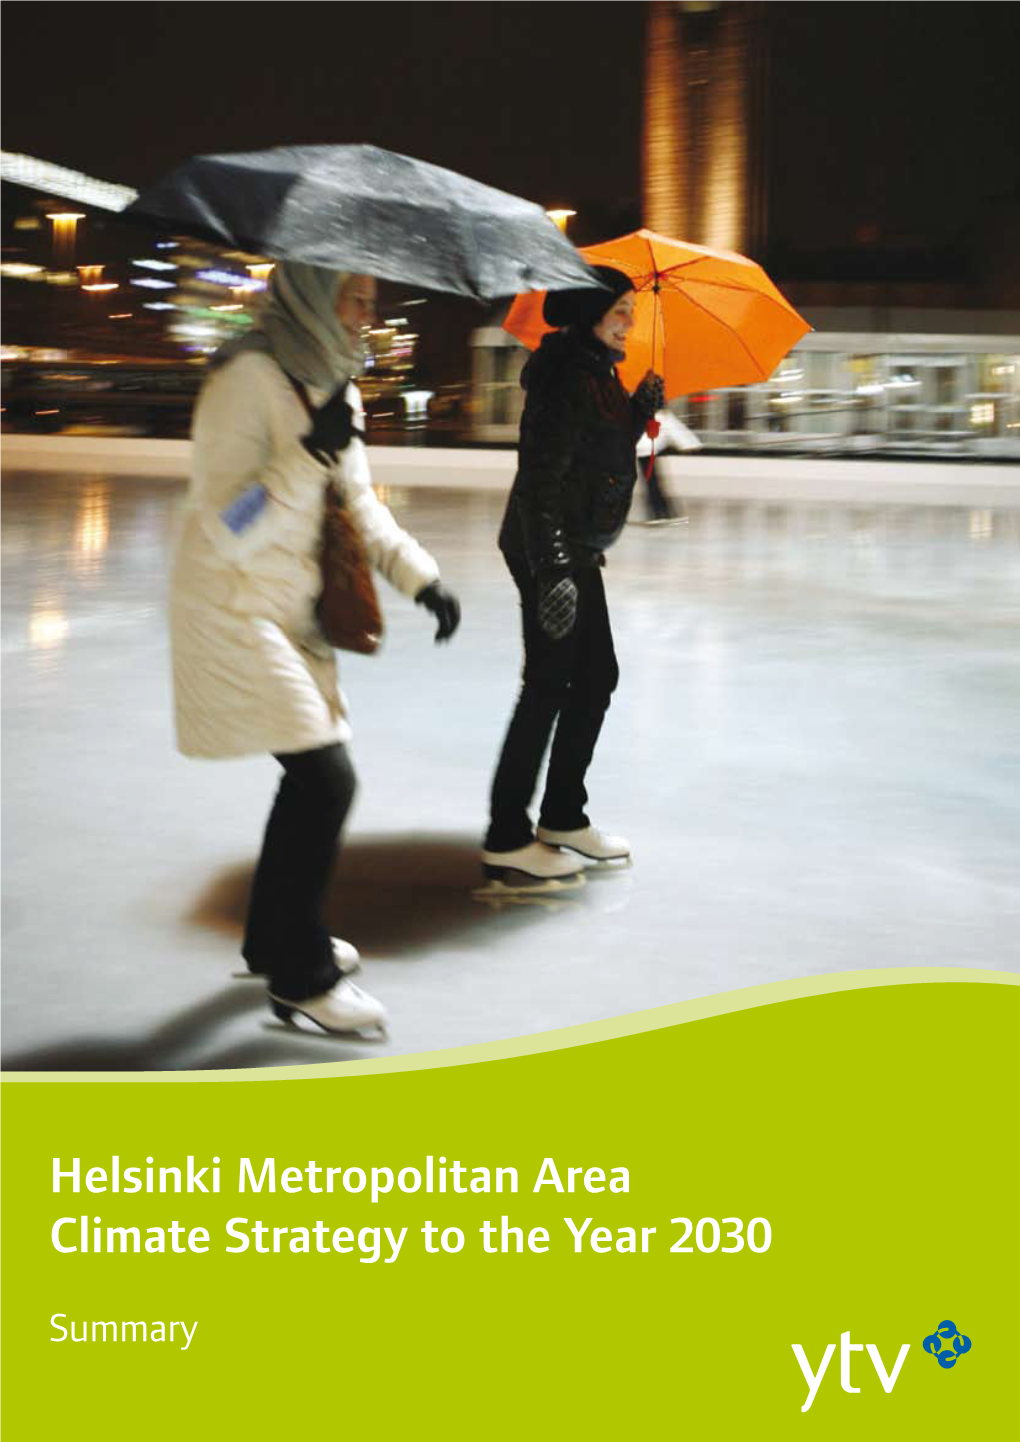 Helsinki Metropolitan Area Climate Strategy to the Year 2030